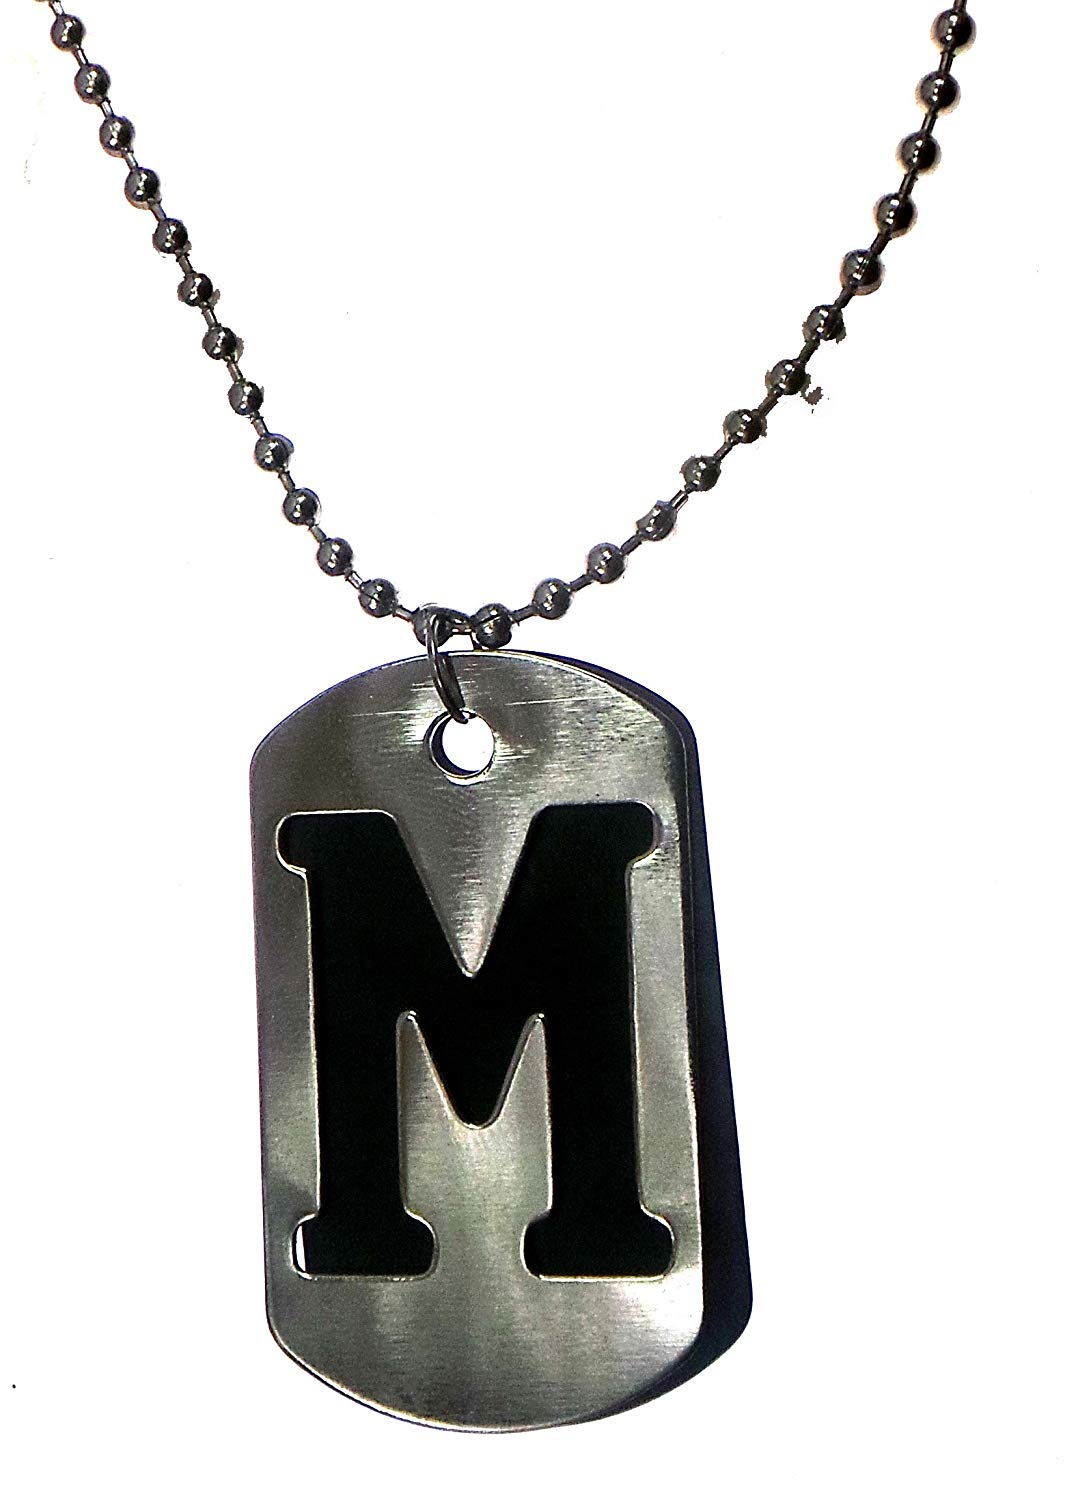 Buy 'm' Name Steel Locket With Chain Online At Low - Necklace Joyalukkas Jewellery Designs With Price , HD Wallpaper & Backgrounds